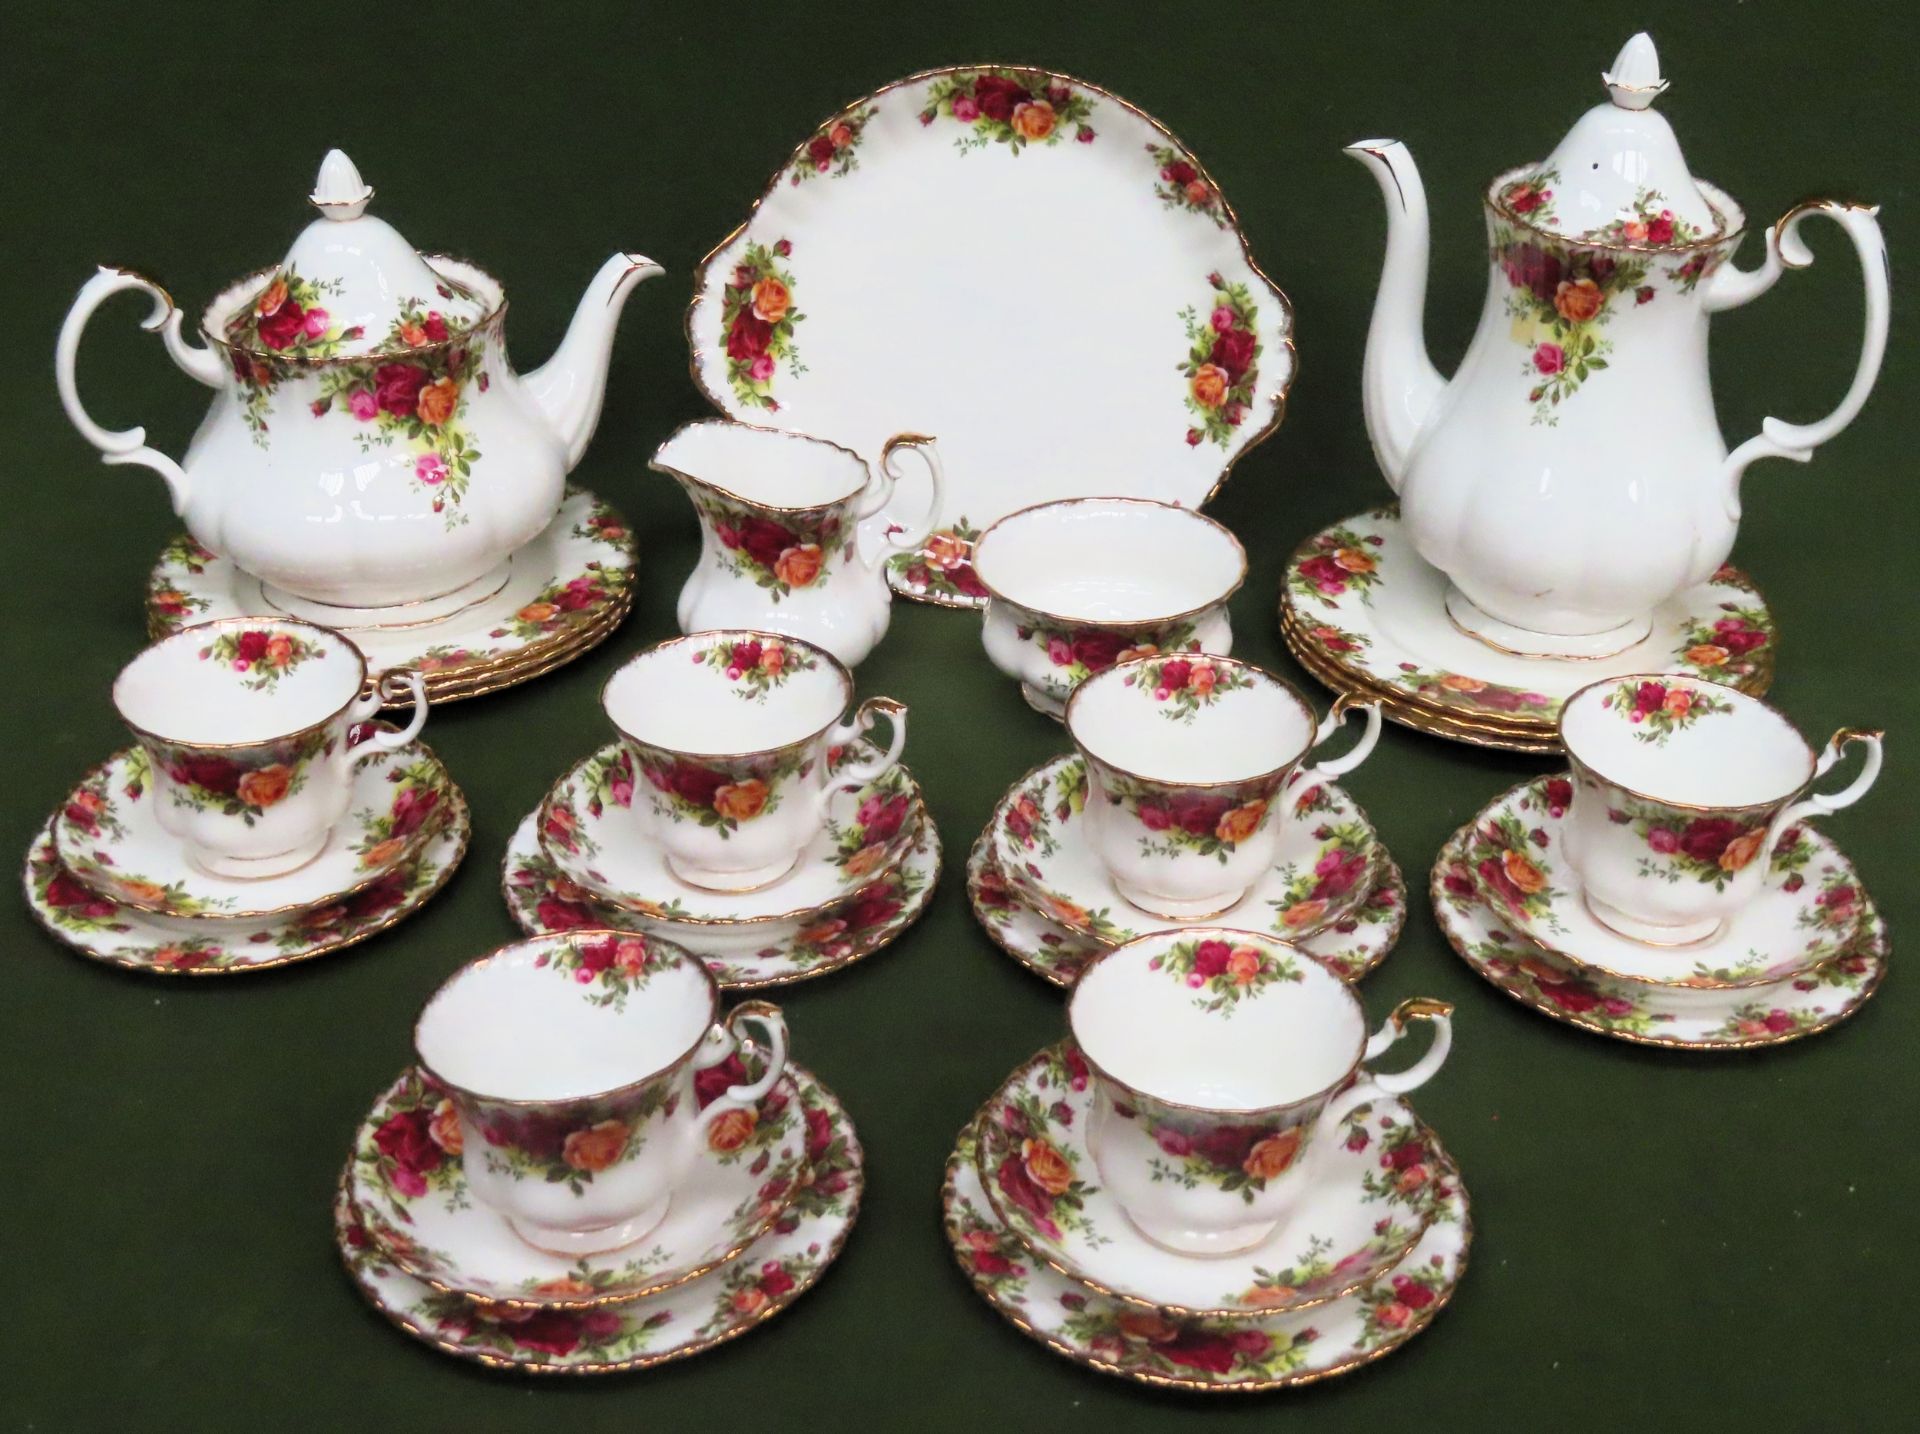 Large quantity of Royal Albert Old Country Roses